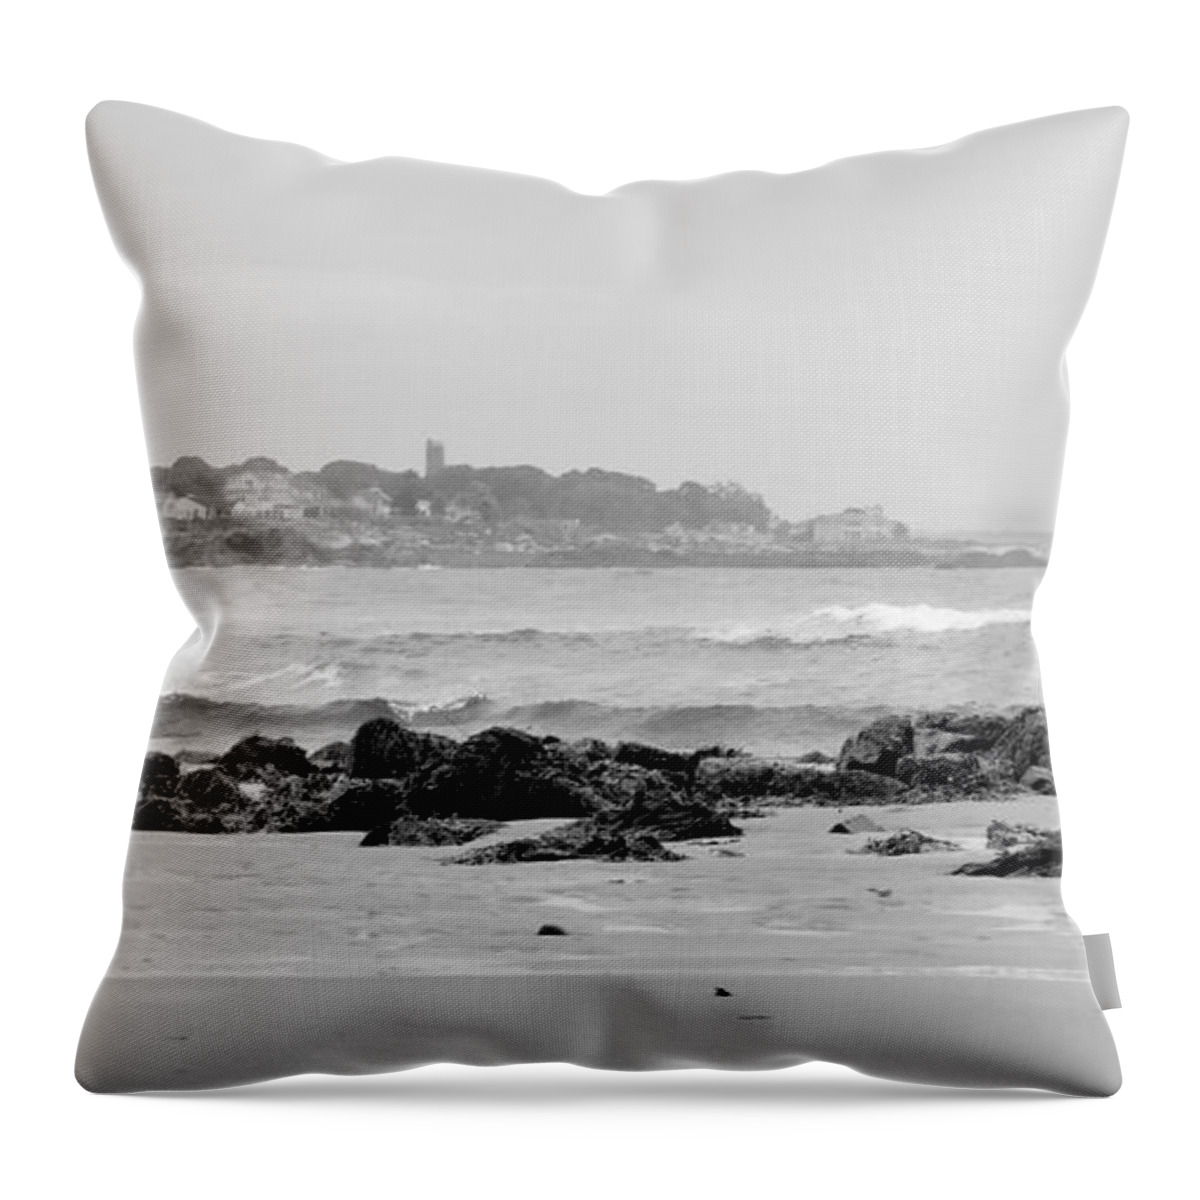 - Pirates Cove - Black And White - Rye Nh Throw Pillow featuring the photograph - Pirates Cove - Black and White - Rye Nh by THERESA Nye